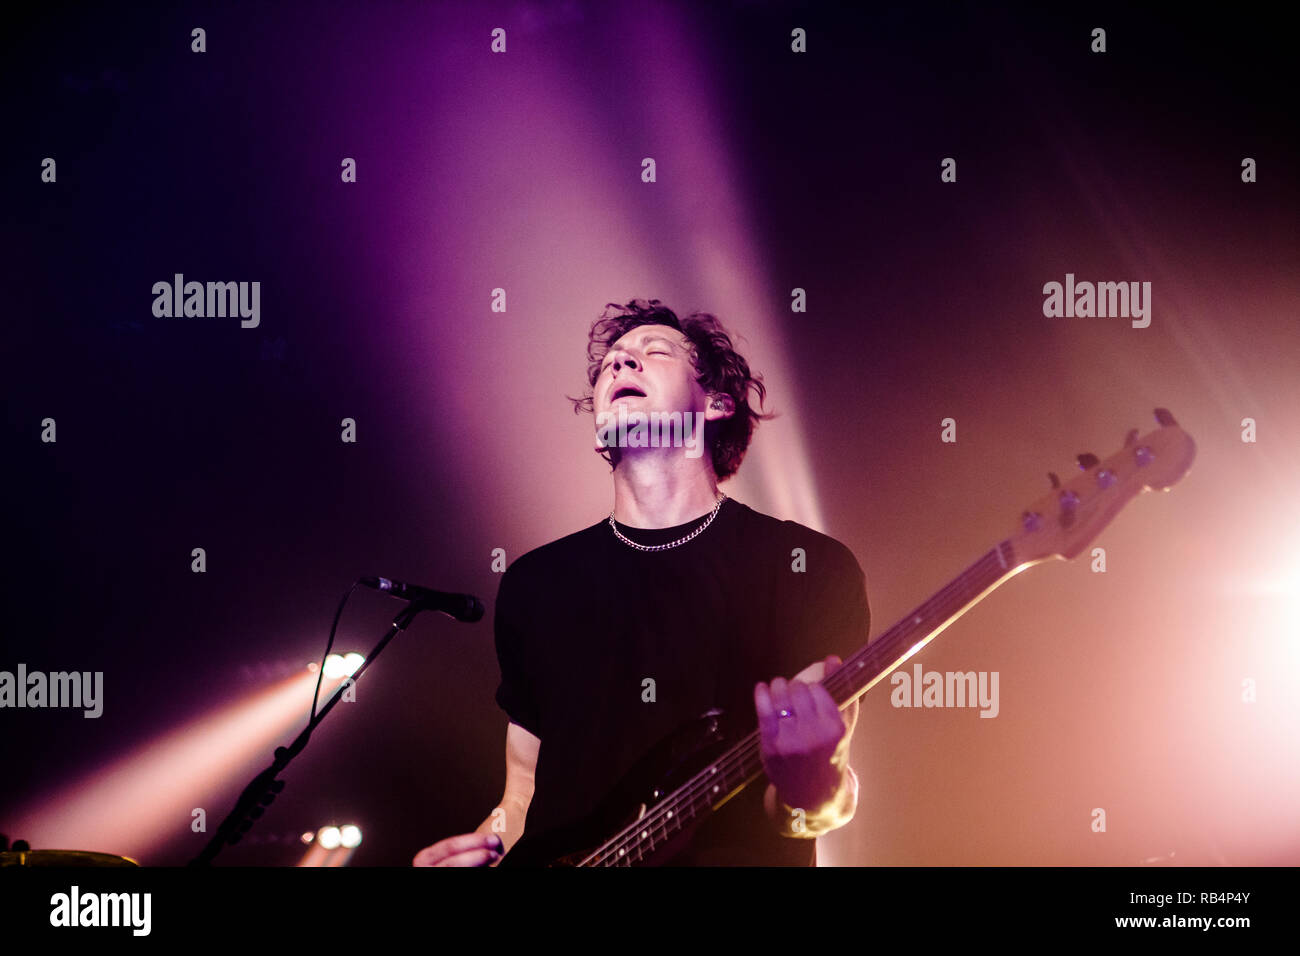 Foals The English Indie Rock Band Perform A Liv Concert At Vega In Copenhagen Here Bass Player Walter Gervers Is Seen Live On Stage Denmark 10 09 2015 Excluding Denmark Stock Photo Alamy